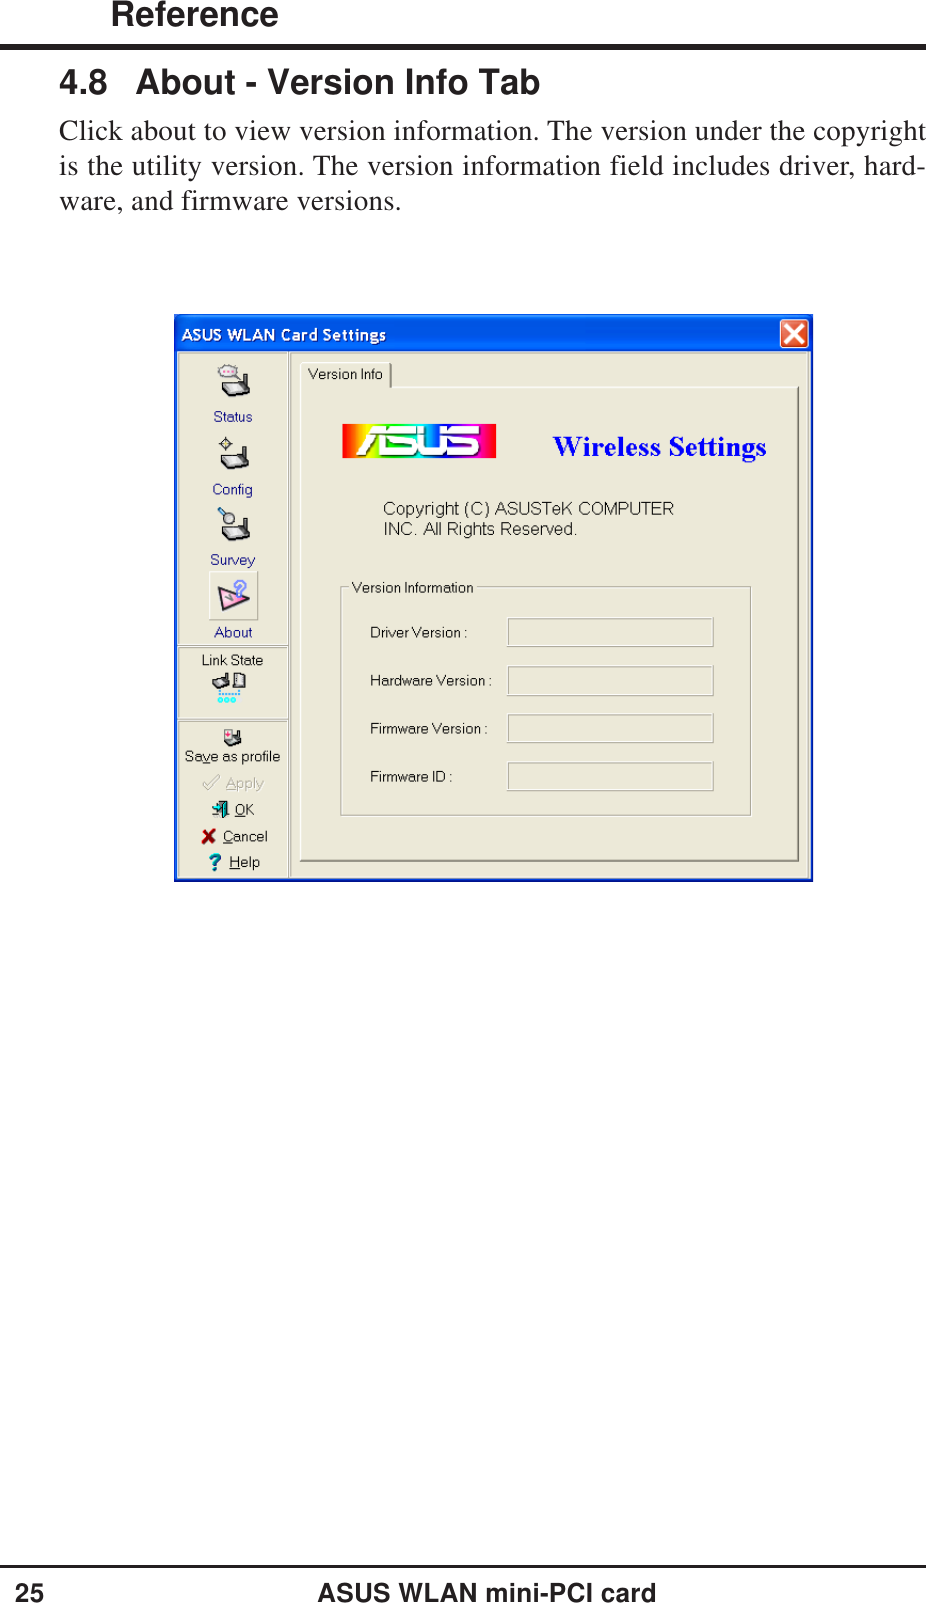 25 ASUS WLAN mini-PCI card ReferenceChapter 34.8 About - Version Info TabClick about to view version information. The version under the copyrightis the utility version. The version information field includes driver, hard-ware, and firmware versions.